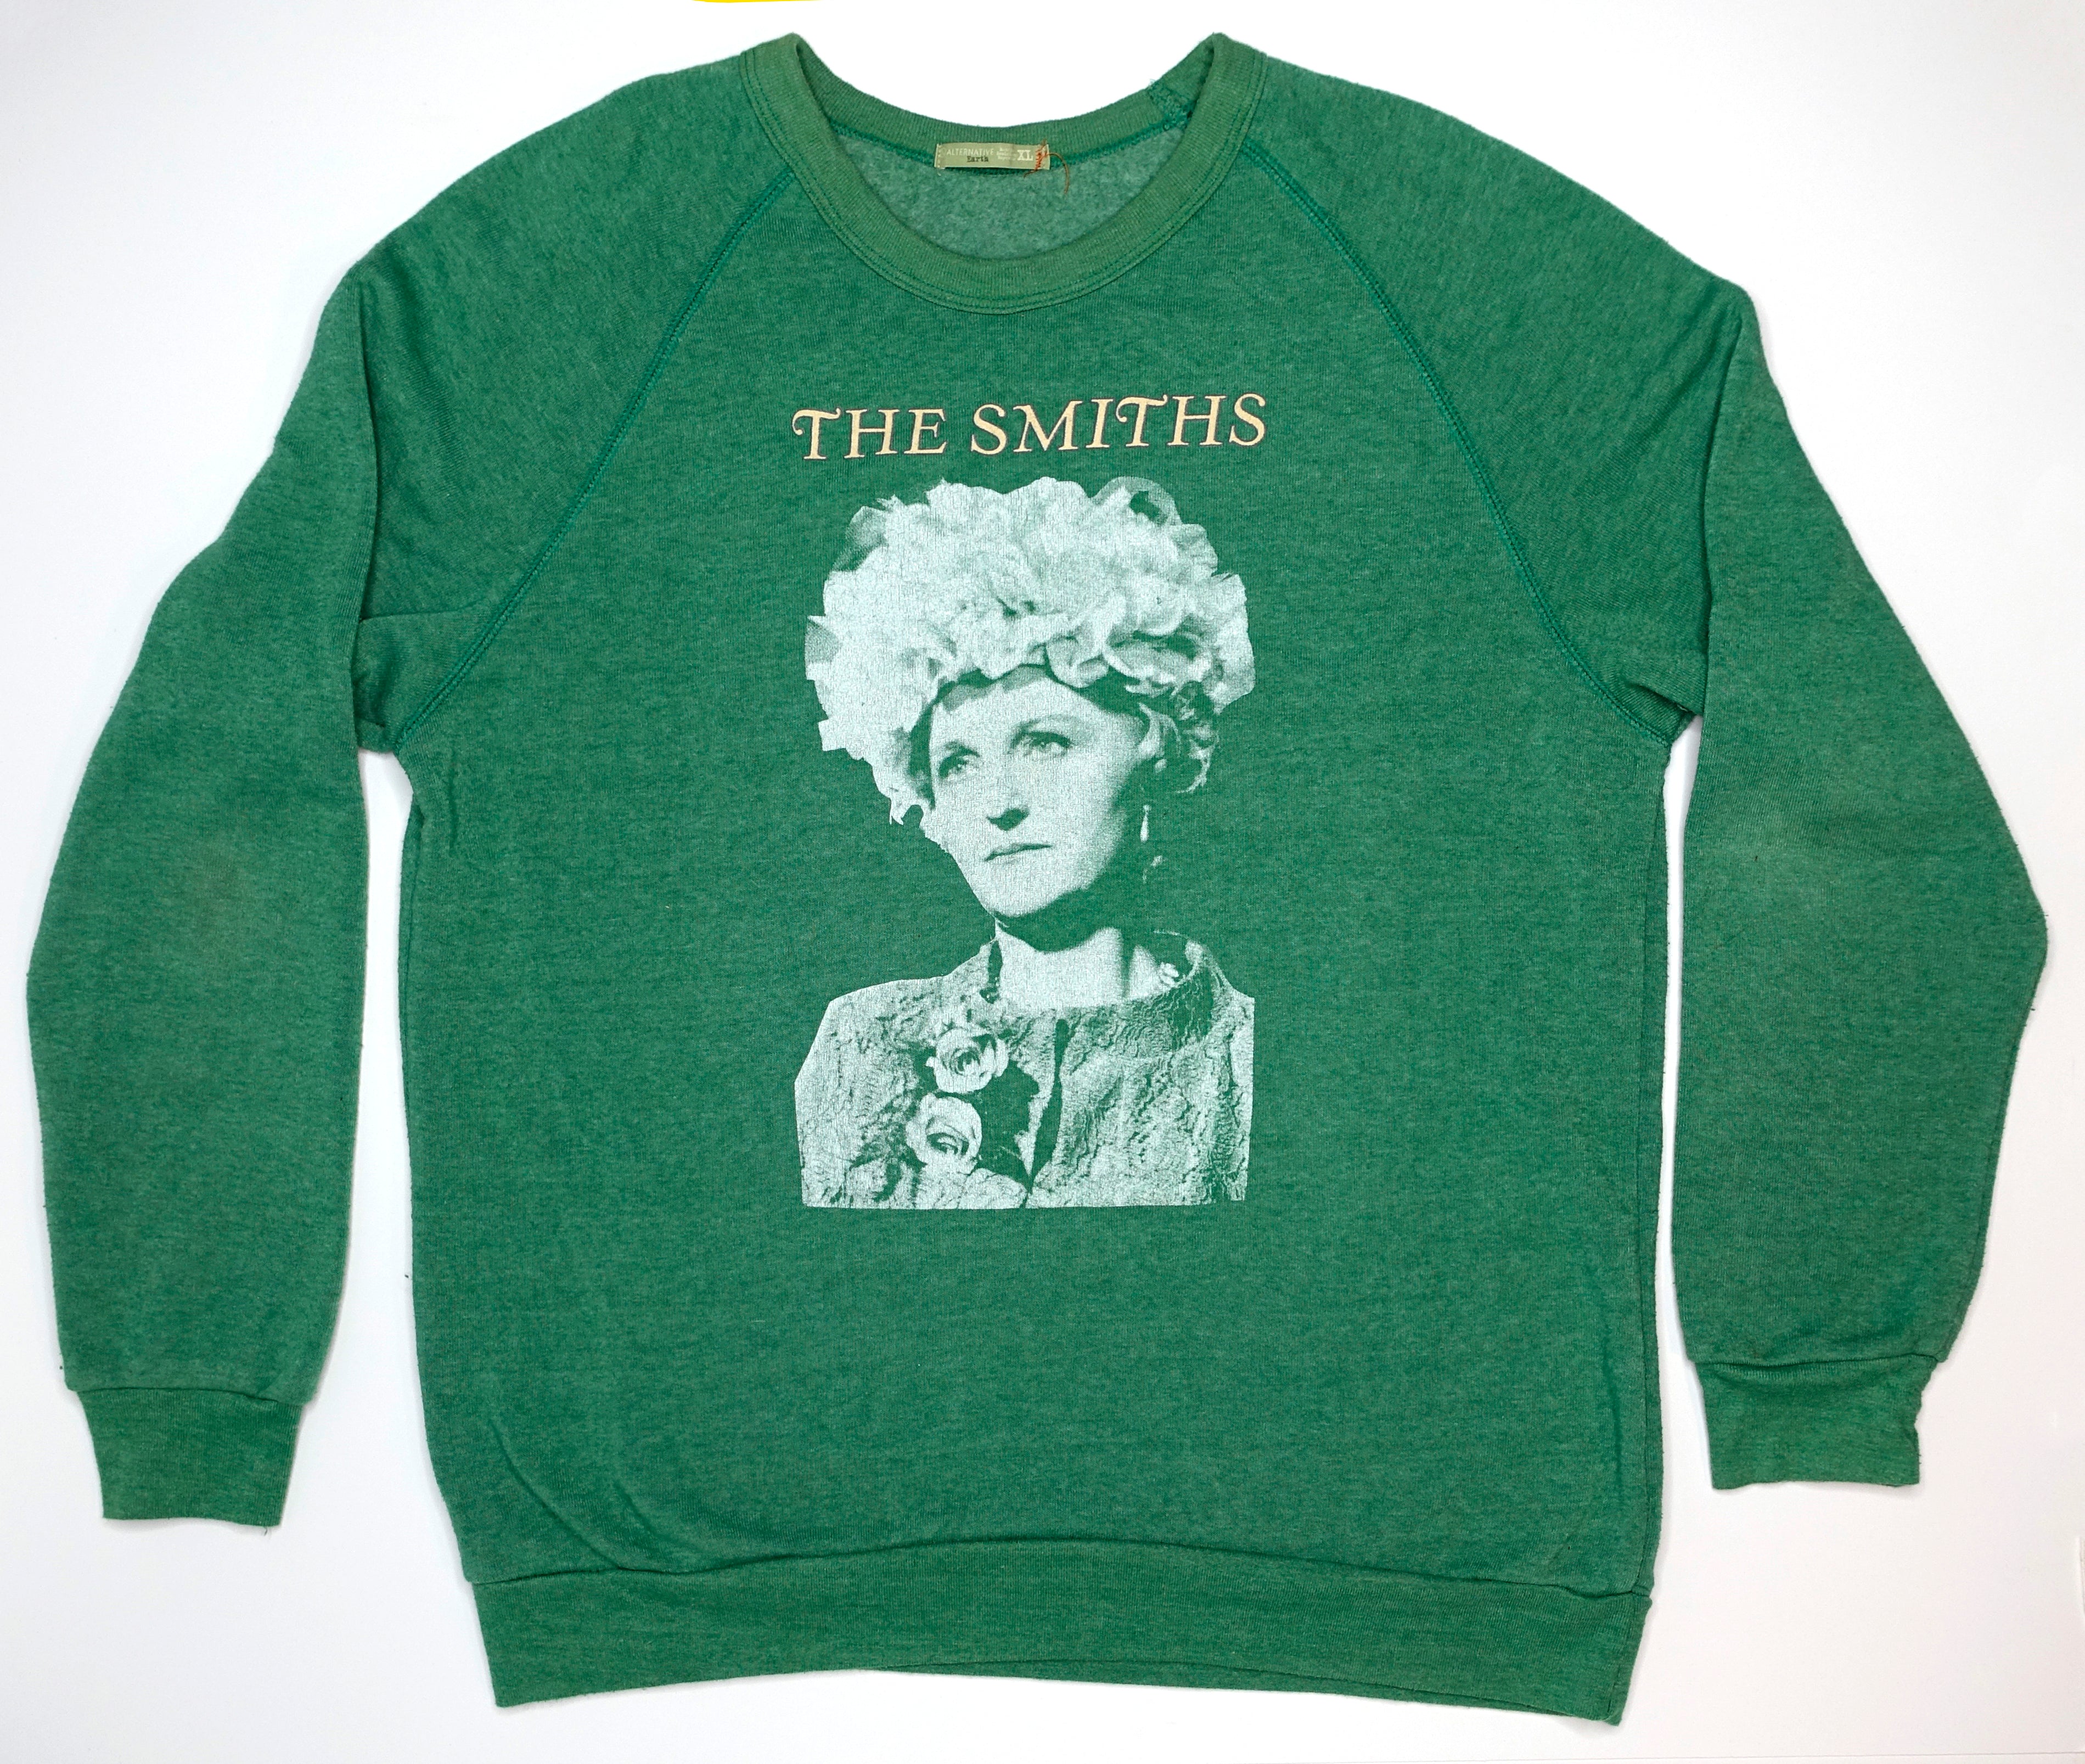 the Smiths - I Started Something I Couldn't Finish Sweat Shirt (Bootleg by Me) Size XL